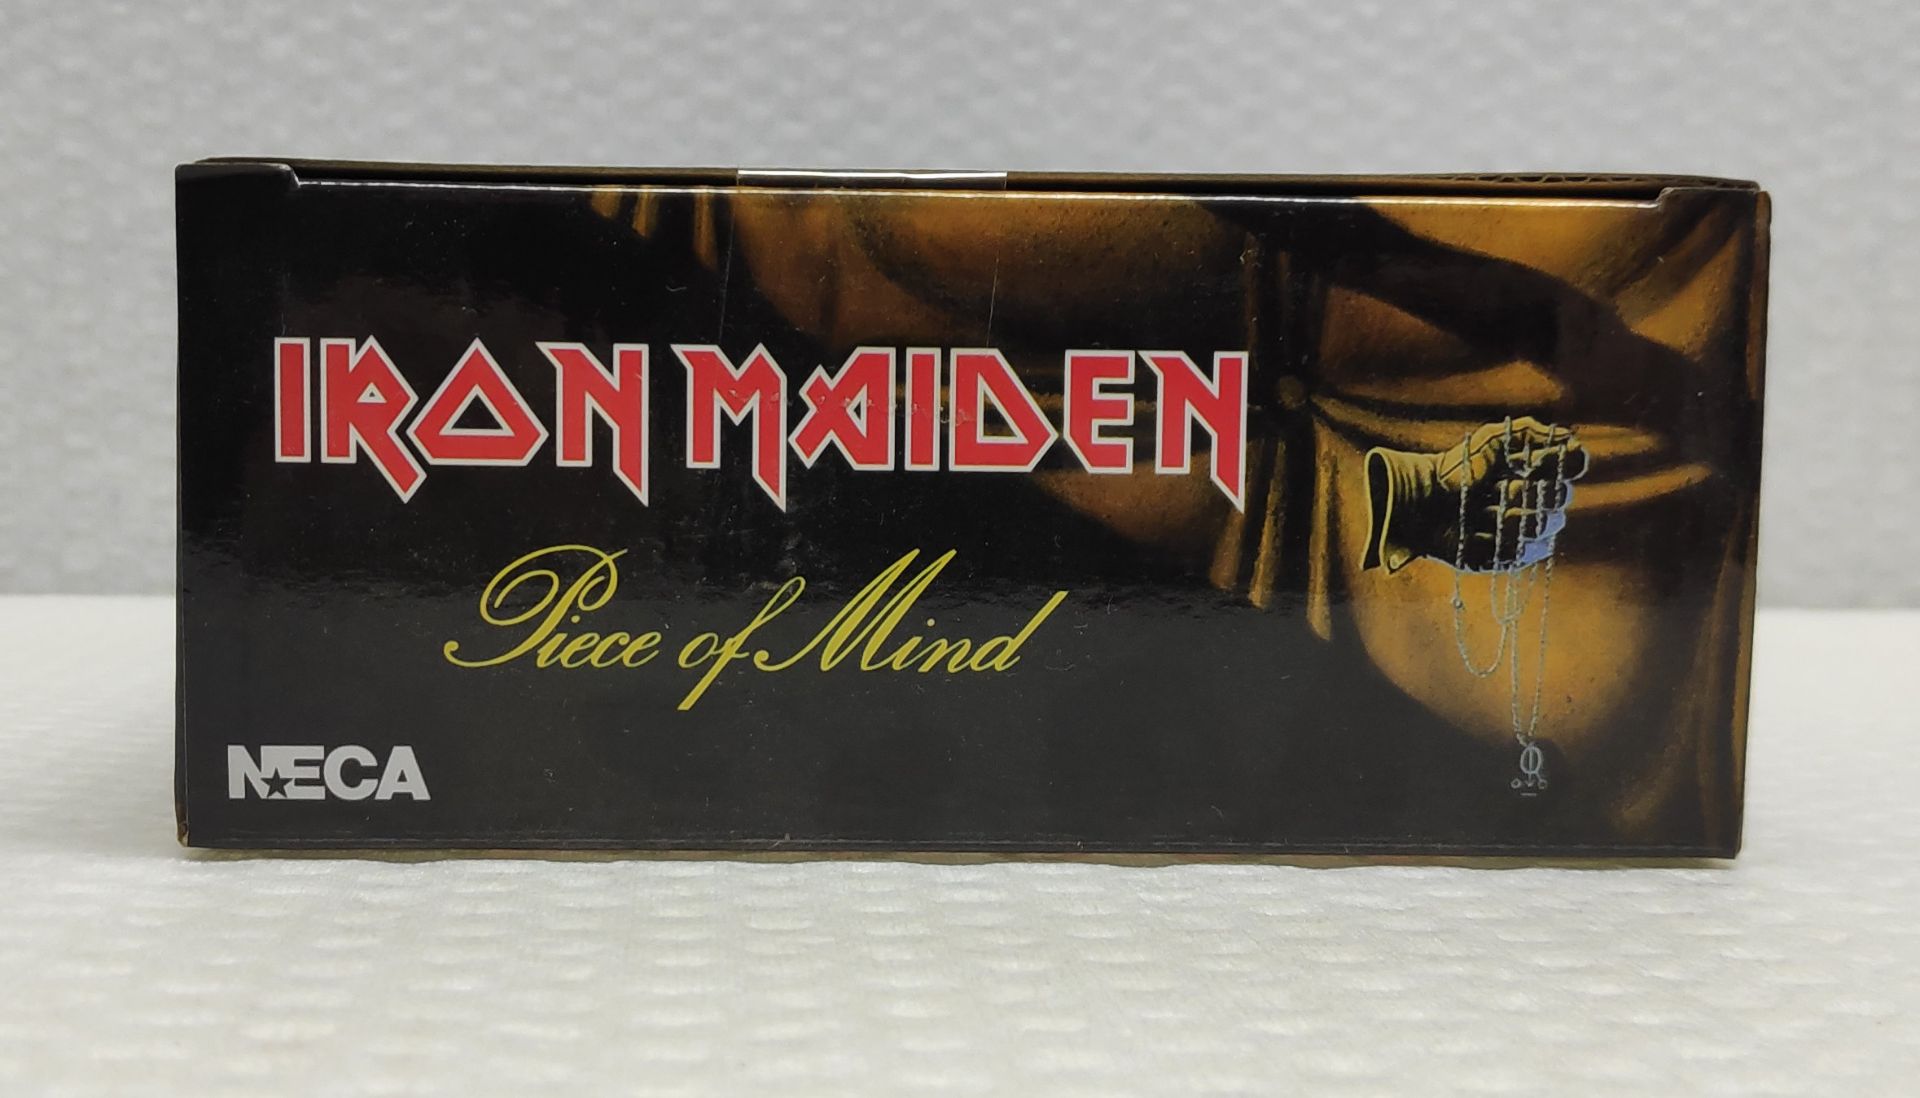 1 x Iron Maiden Eddie Piece of Mind NECA Action Figure - New/Boxed - HTYS166 - CL720 - Location: Alt - Image 4 of 11